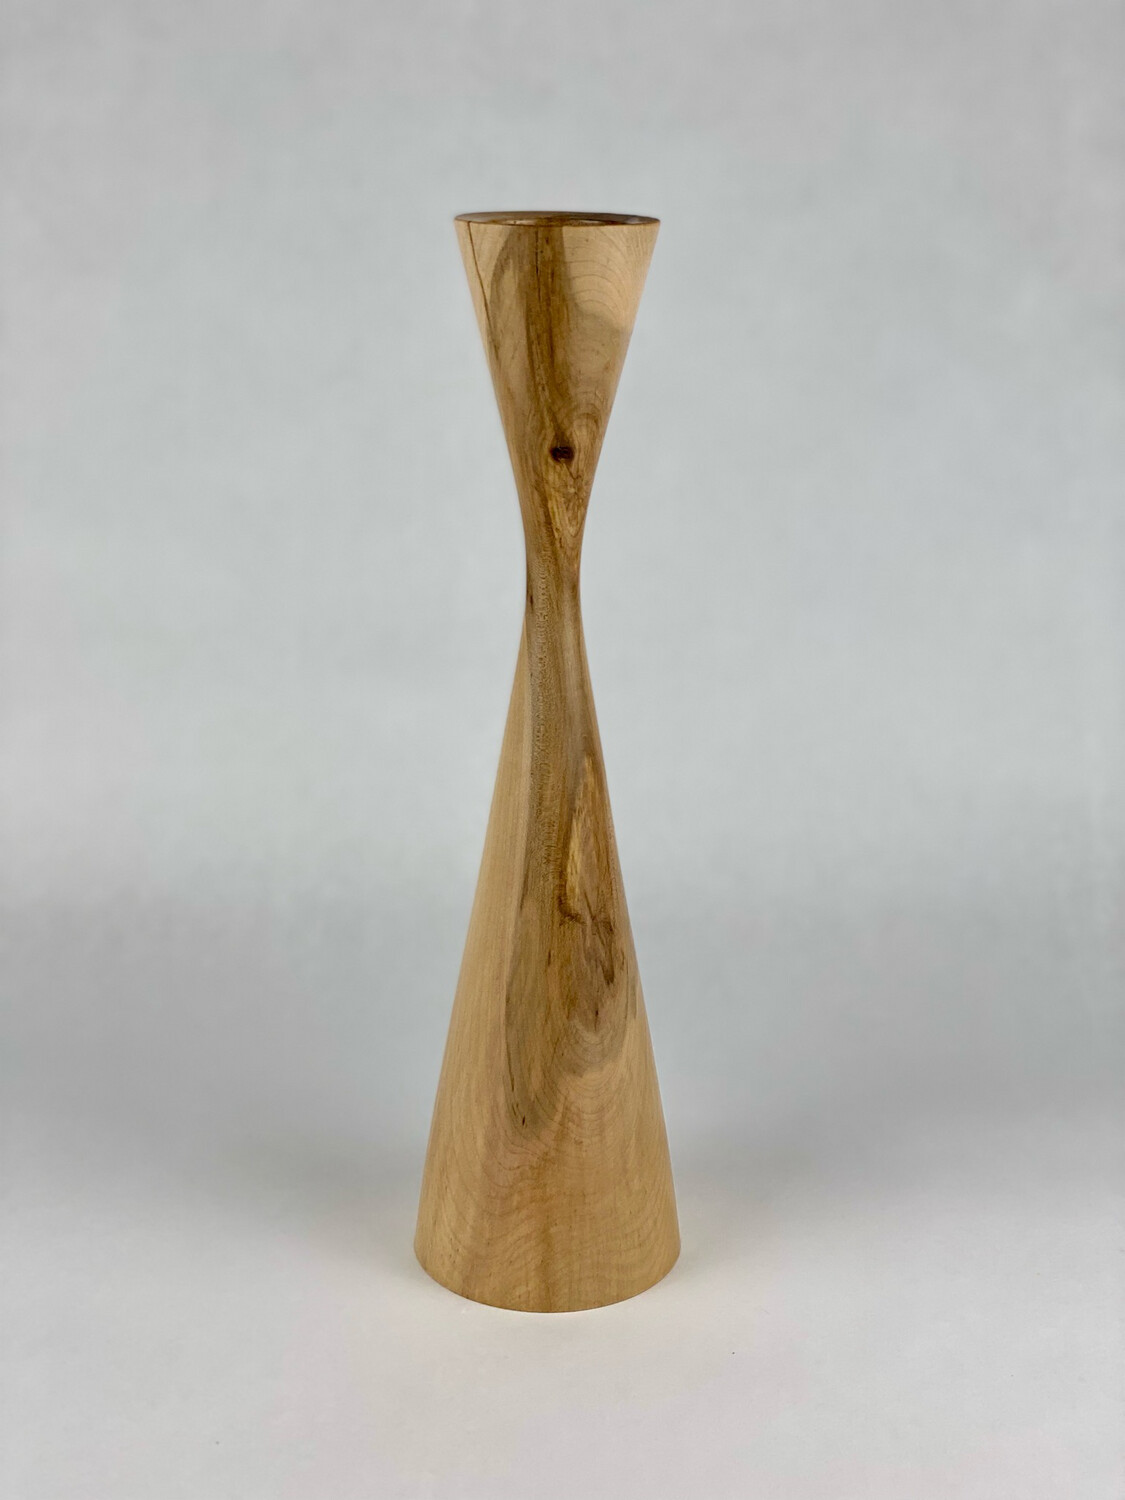 Maple Tealight/Taper Candle Holder